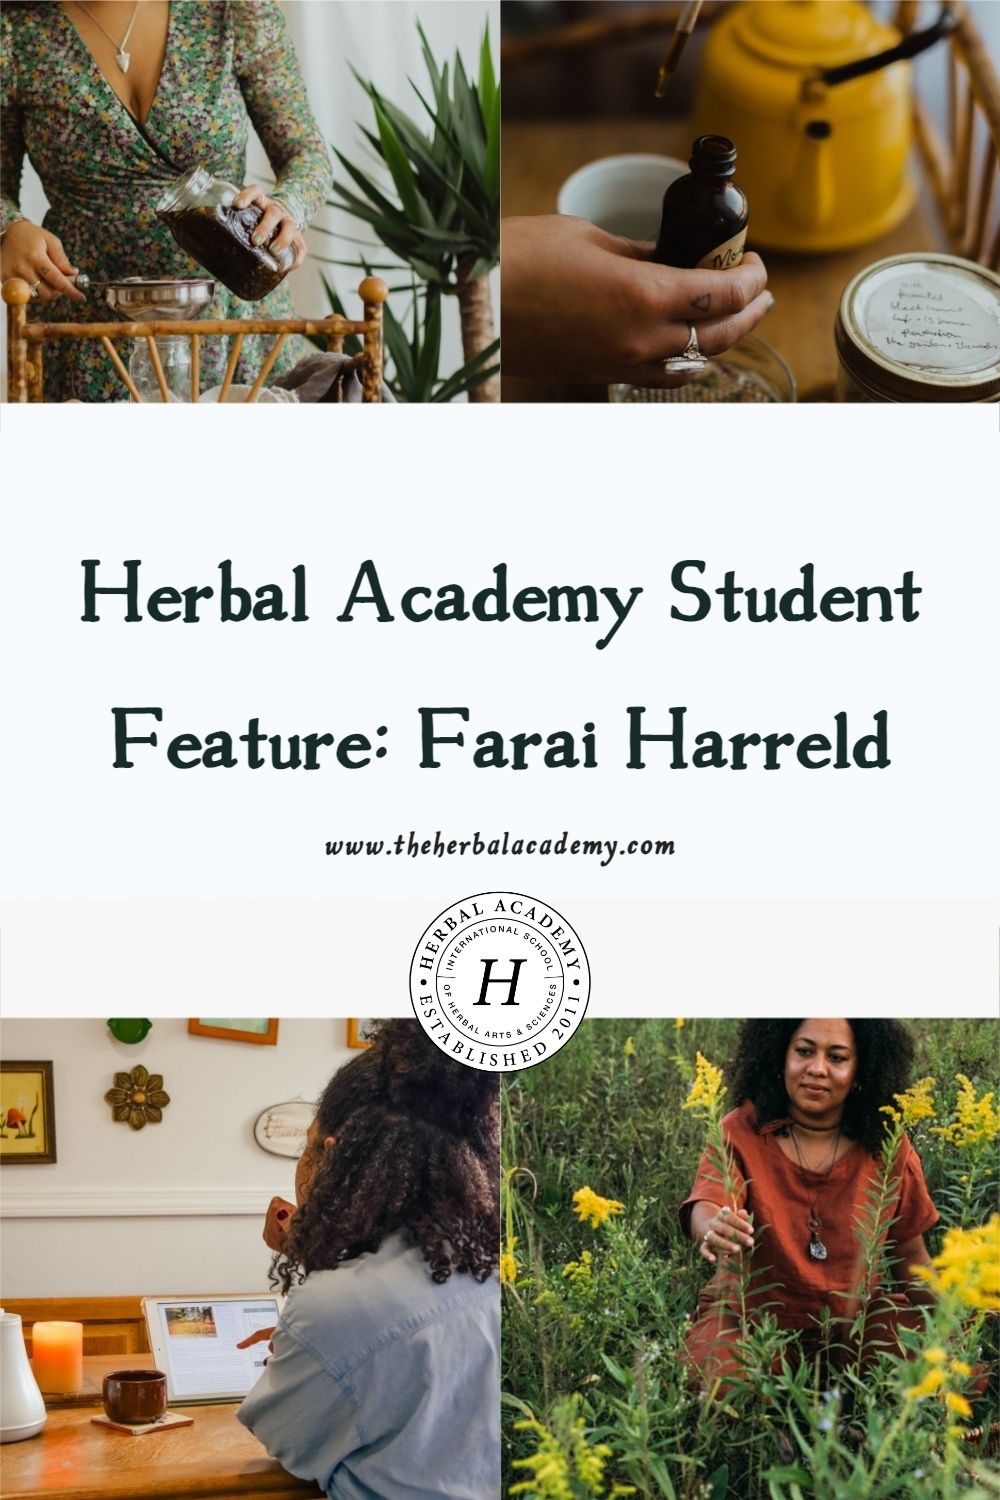 Herbal Academy Student Feature: Farai Harreld | Herbal Academy | Join us for an interview with Farai Harreld (@thehillbillyafrican) to learn about her herbal history and focus on folk herbal remedies.